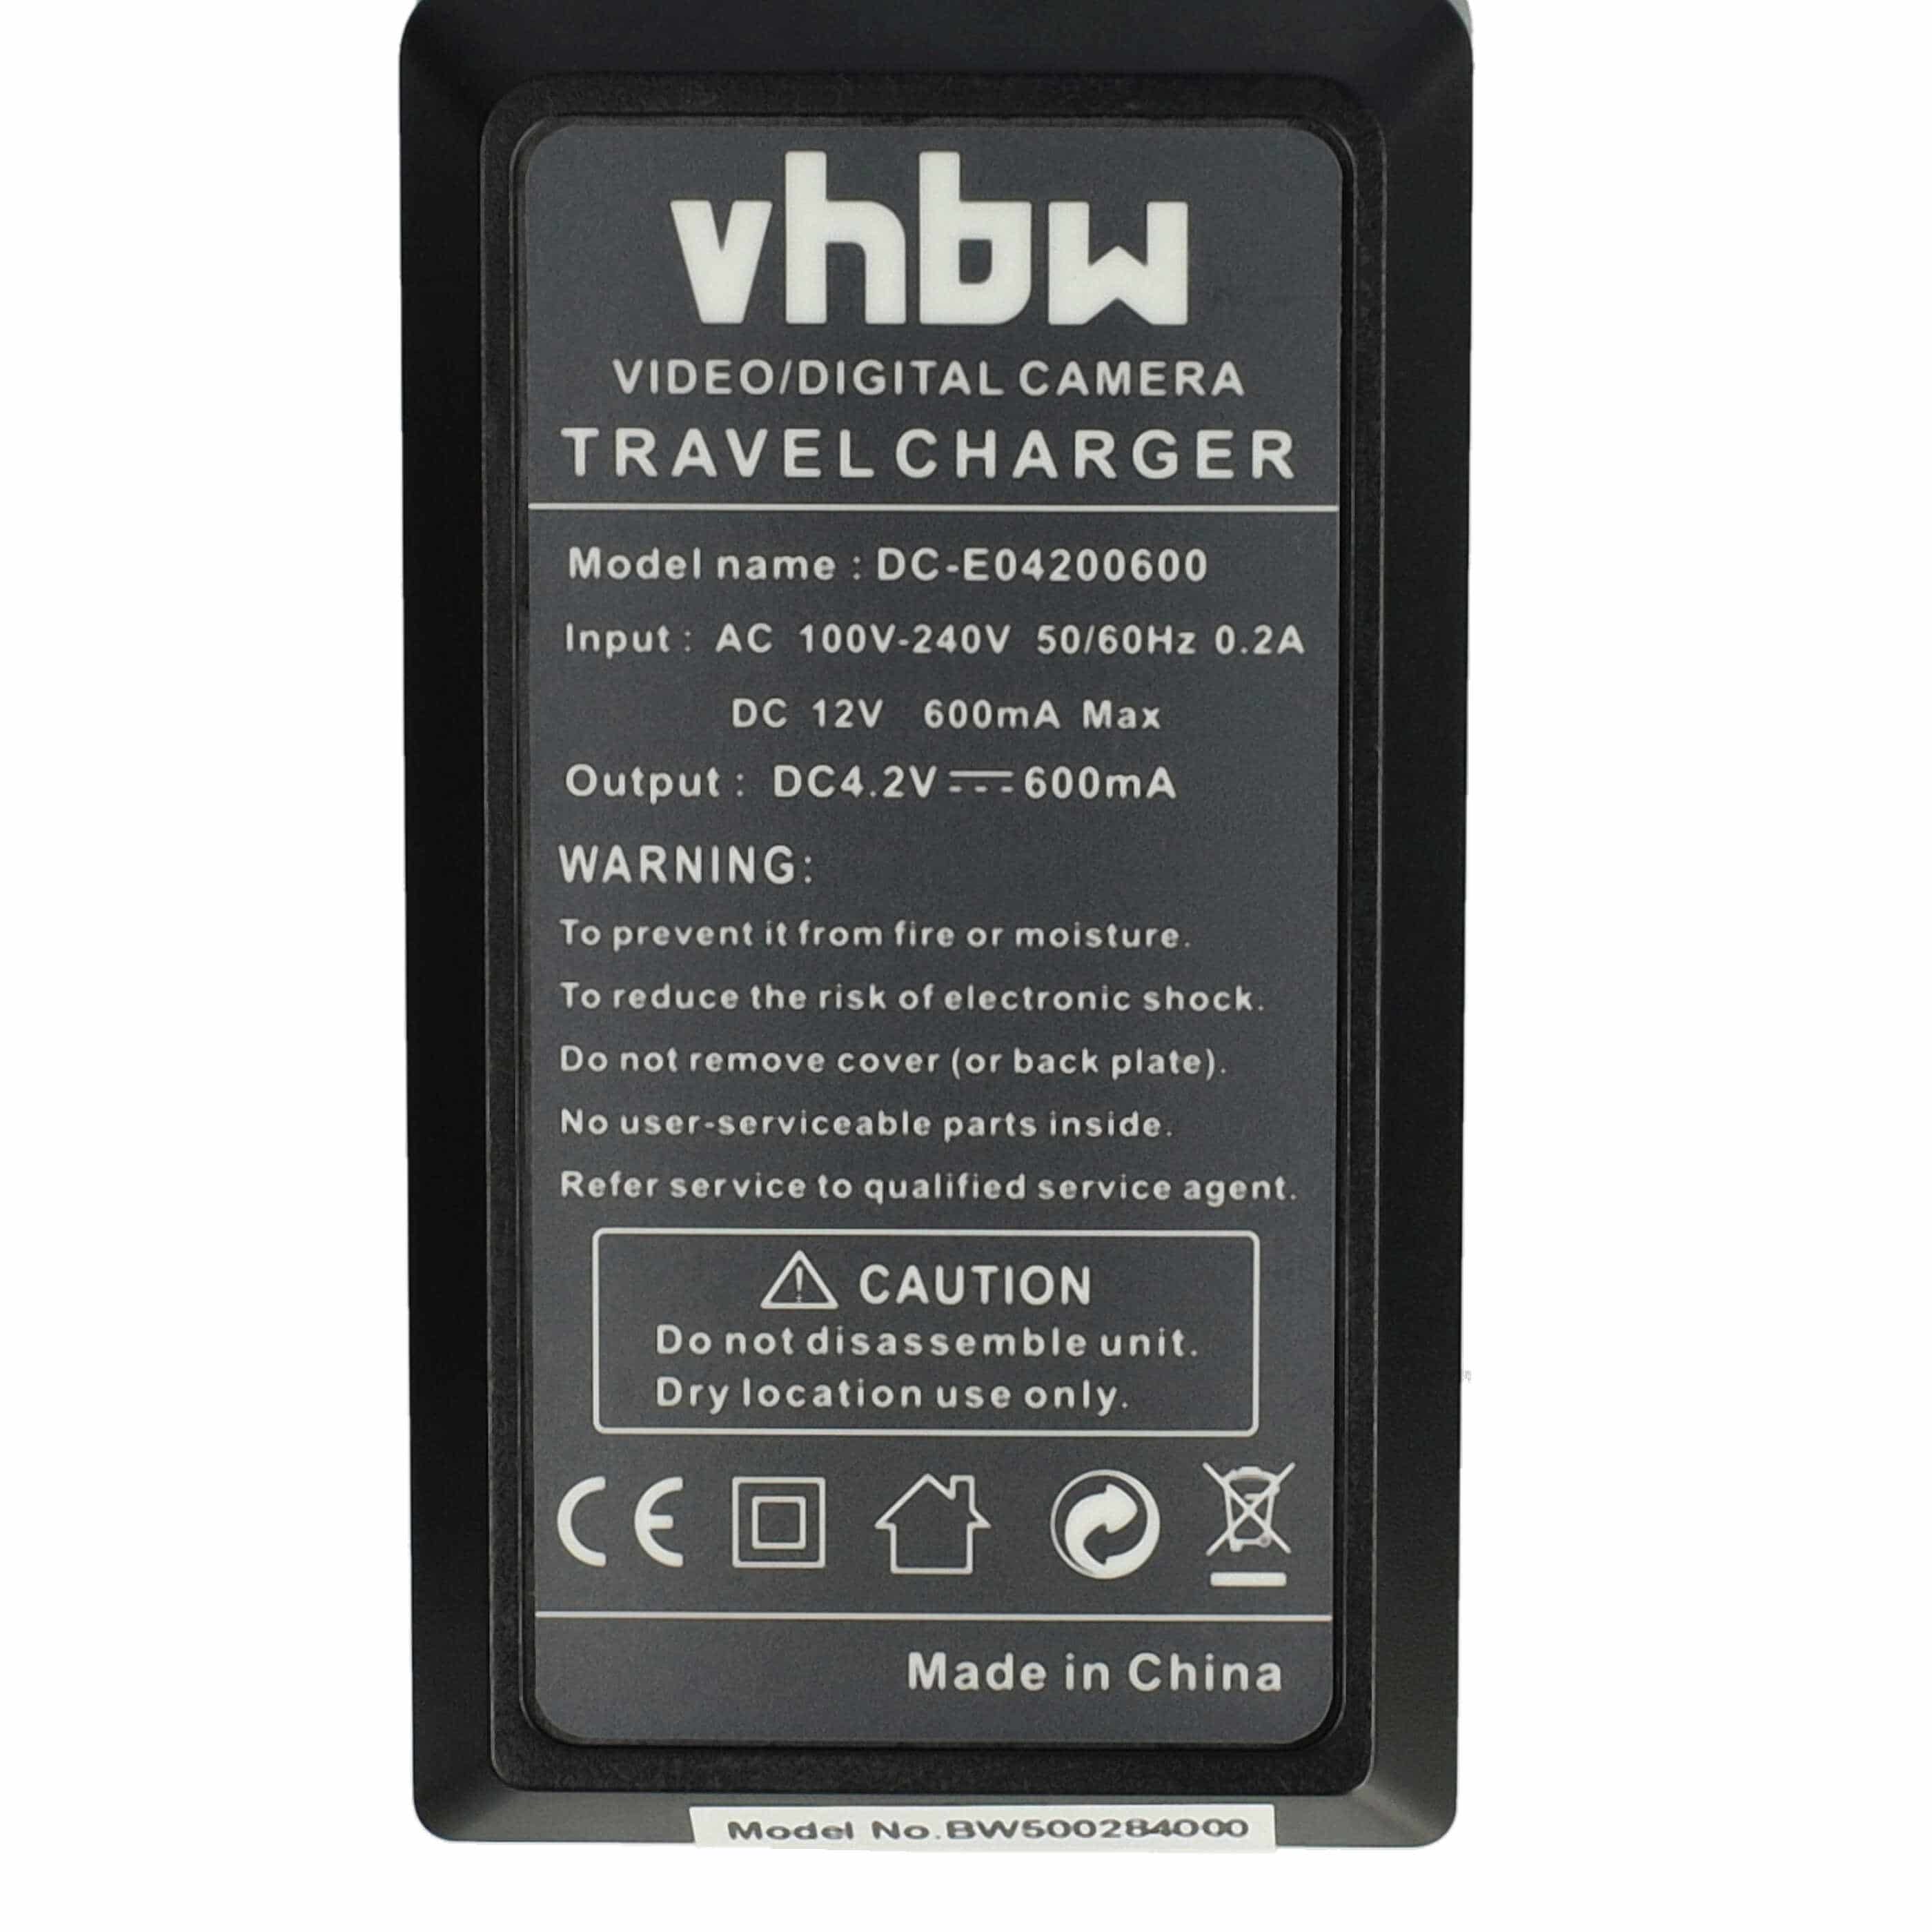 Battery Charger suitable for Camileo X150 Camera etc. - 0.6 A, 4.2 V